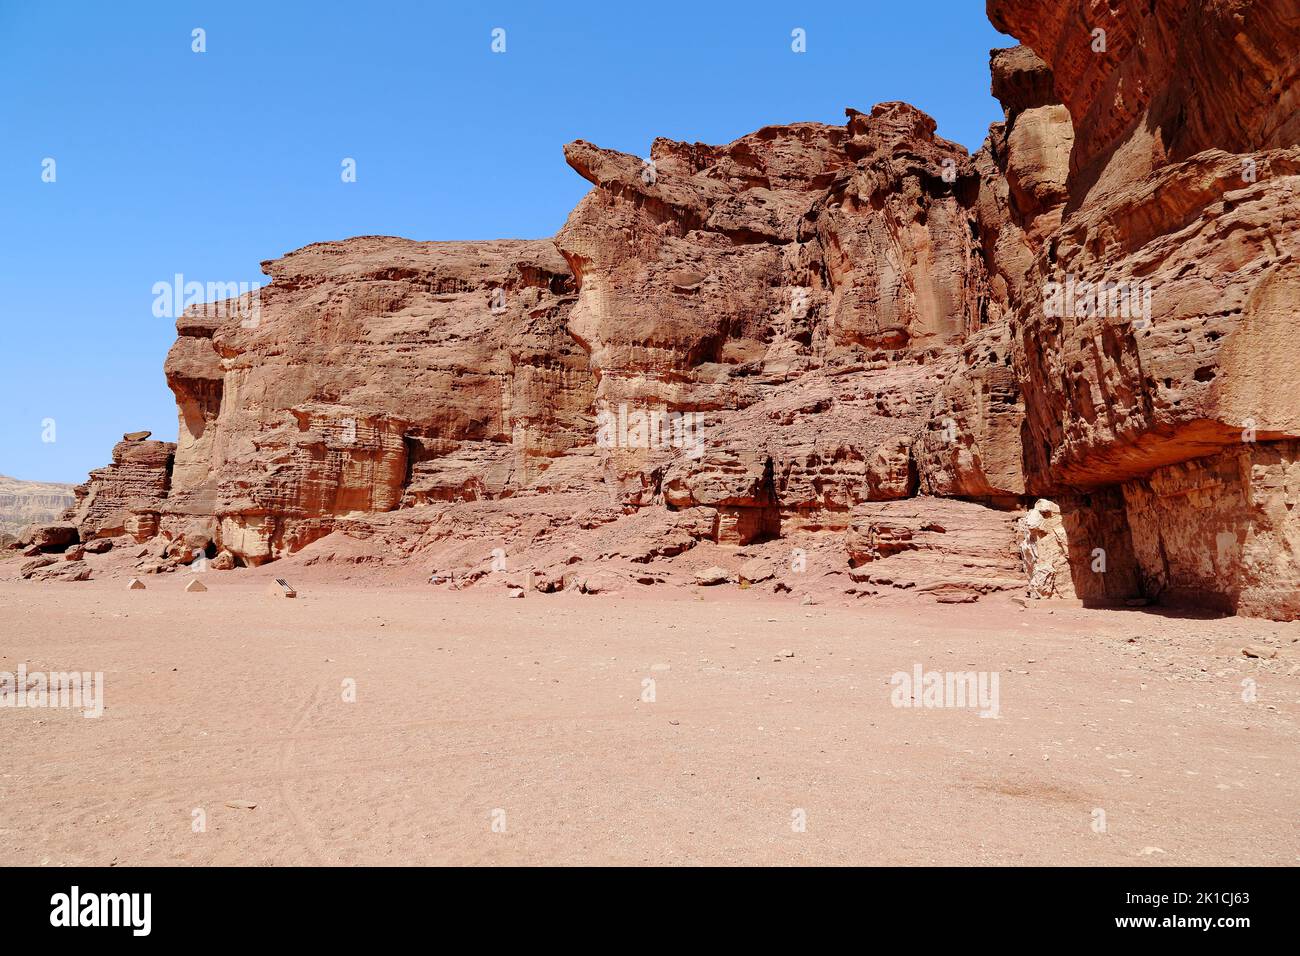 ELIFAZ, ISRAEL - SEPTEMBER 22, 2017: These are erosive formations of red sandstone in the rocks of Timna Nature Park, which are called Solomon Pillars Stock Photo